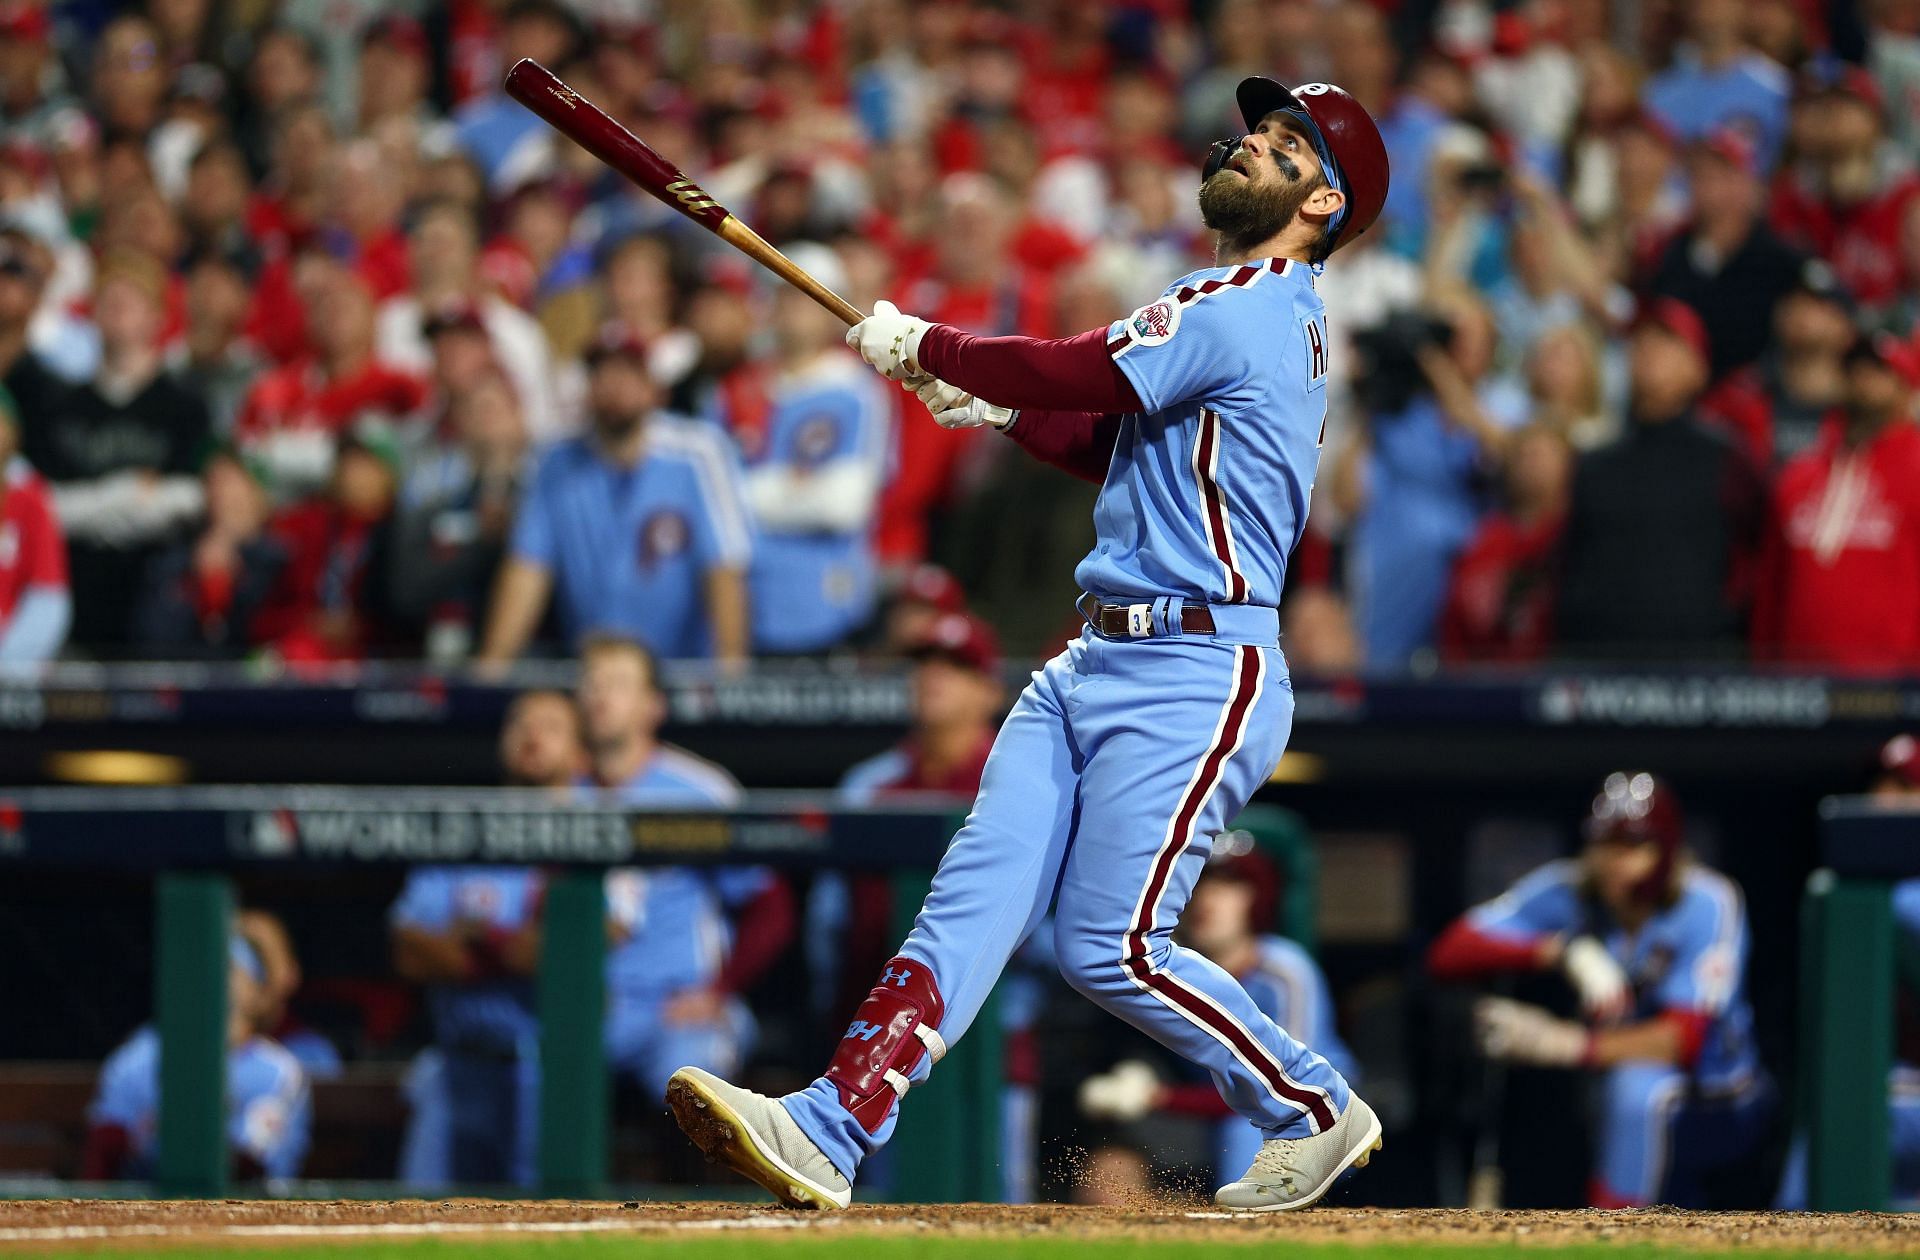 Bryce Harper of the Philadelphia Phillies at bat against the Houston Astros during the seventh inning in Game 4 of the 2022 World Series